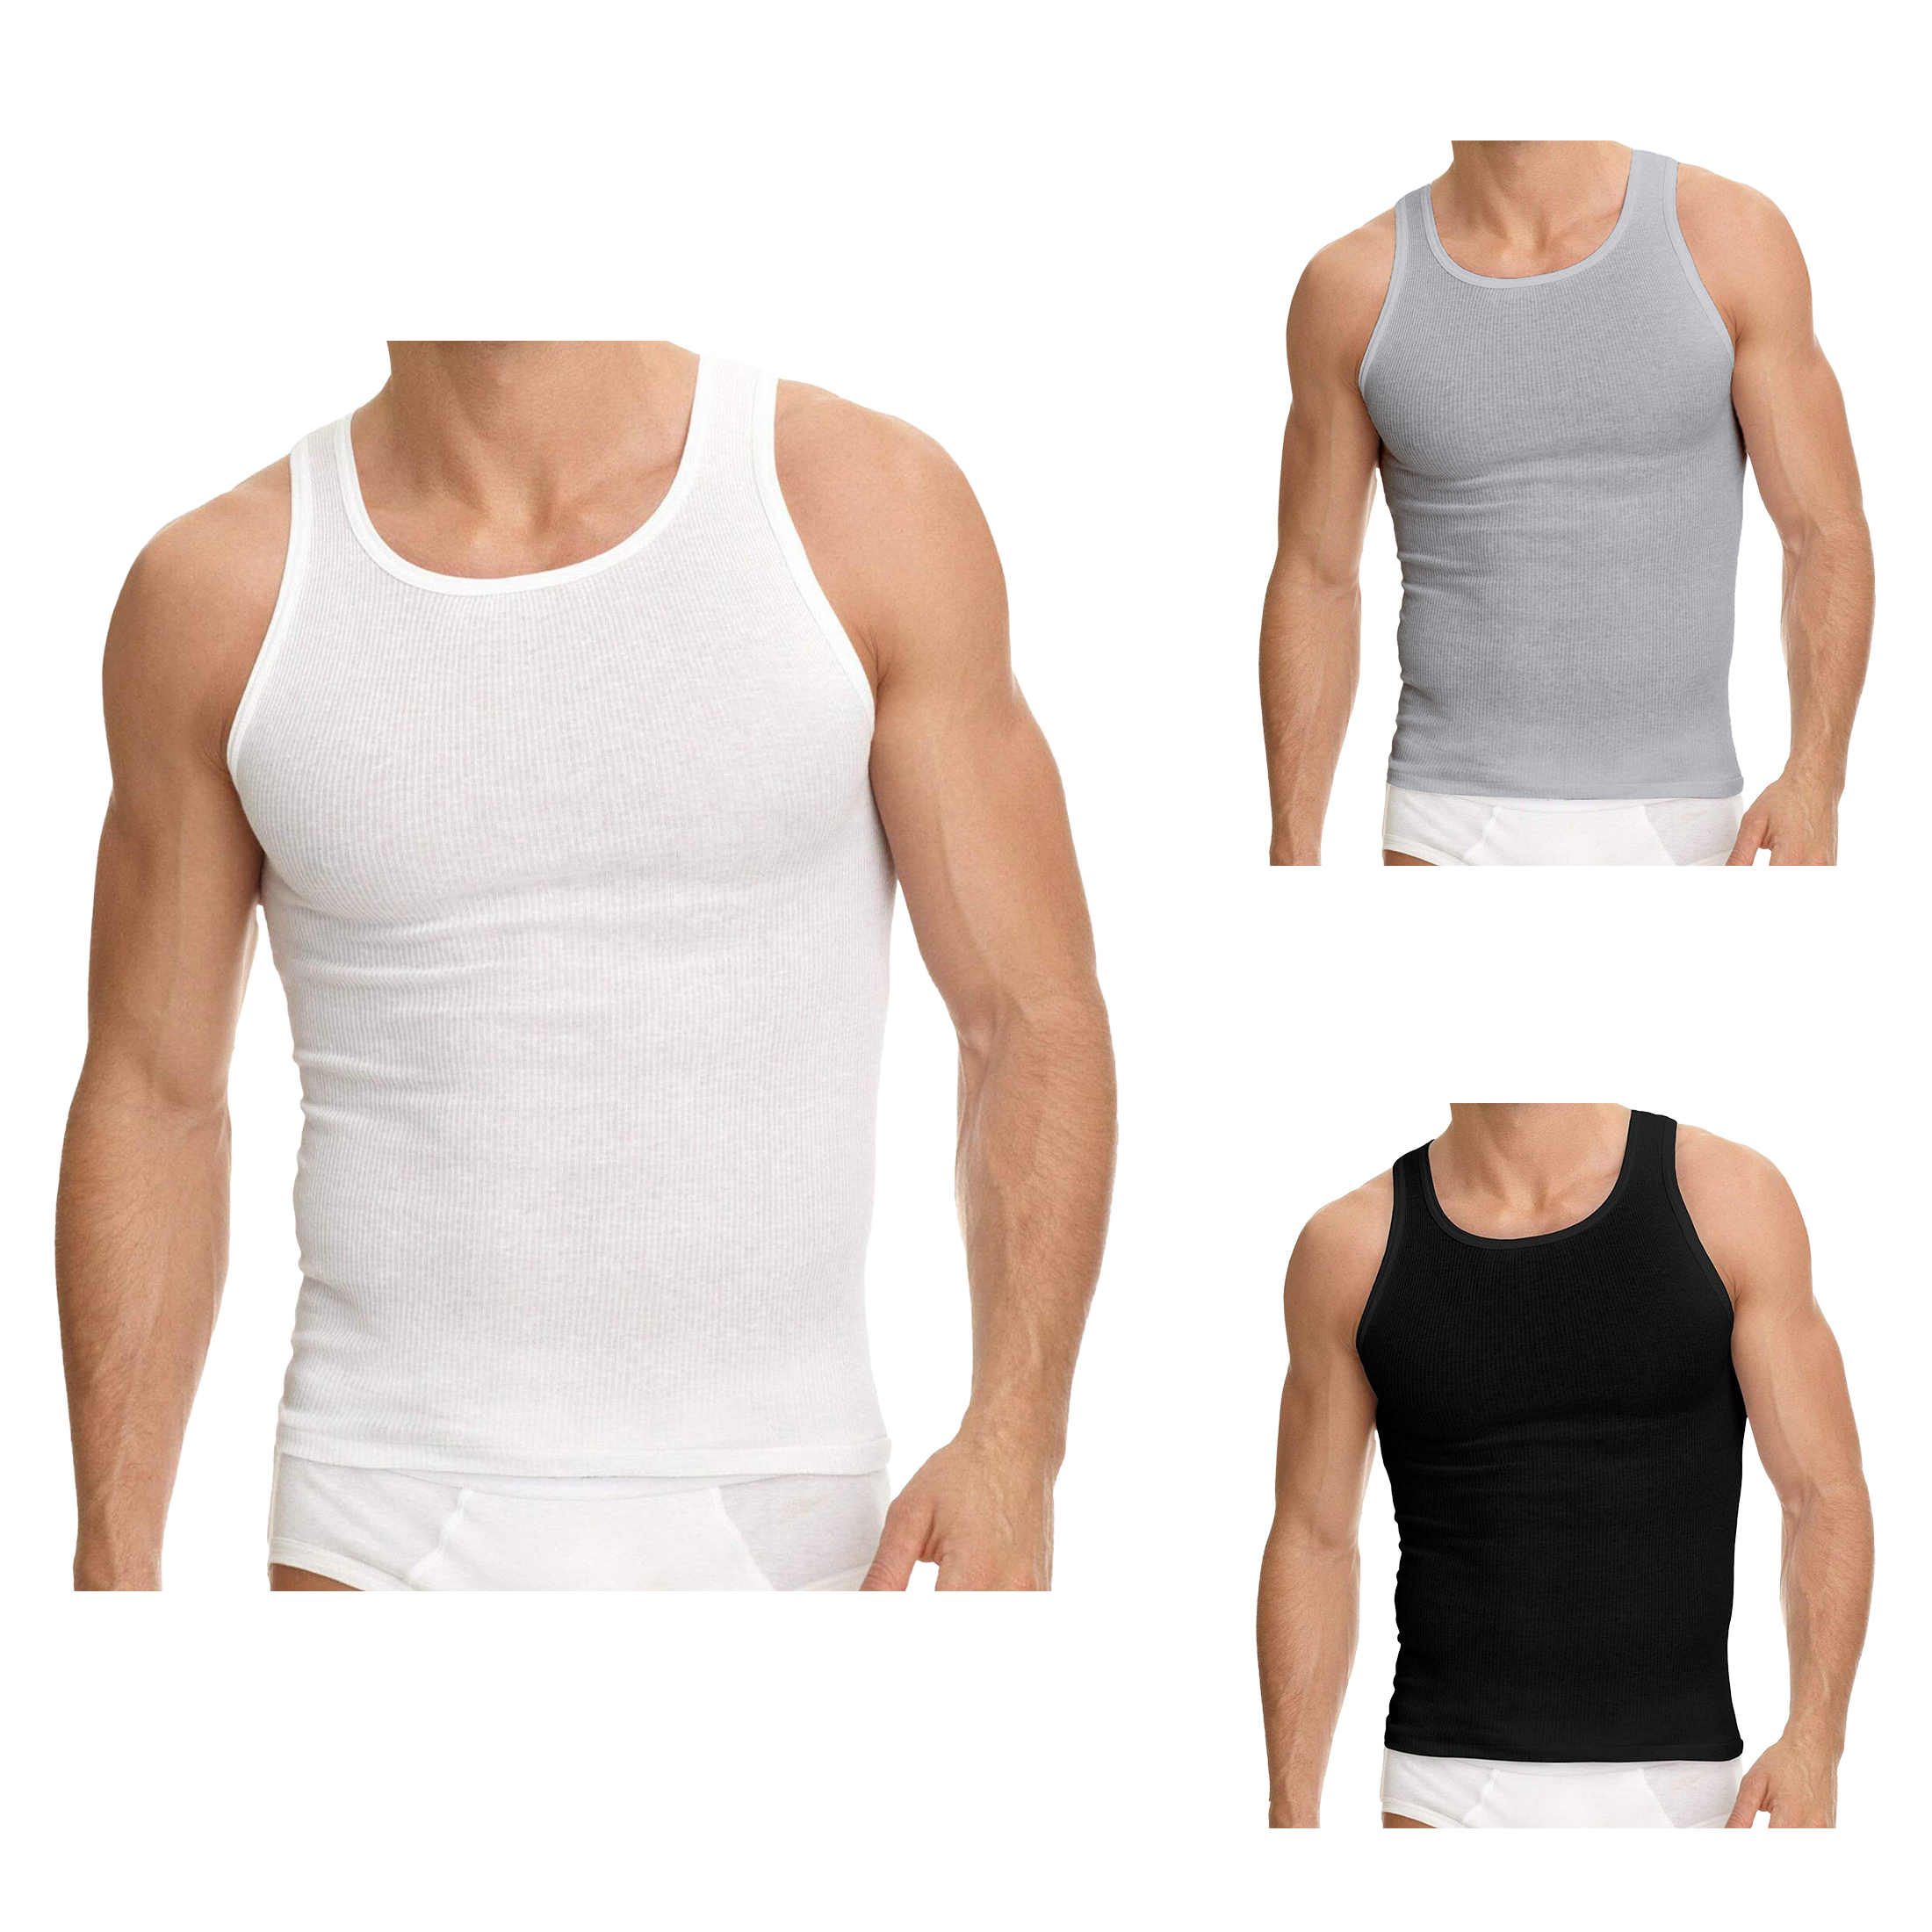 12-Pack: Men's Solid Cotton Soft Ribbed Slim-Fitting Summer Tank Tops - White, Large